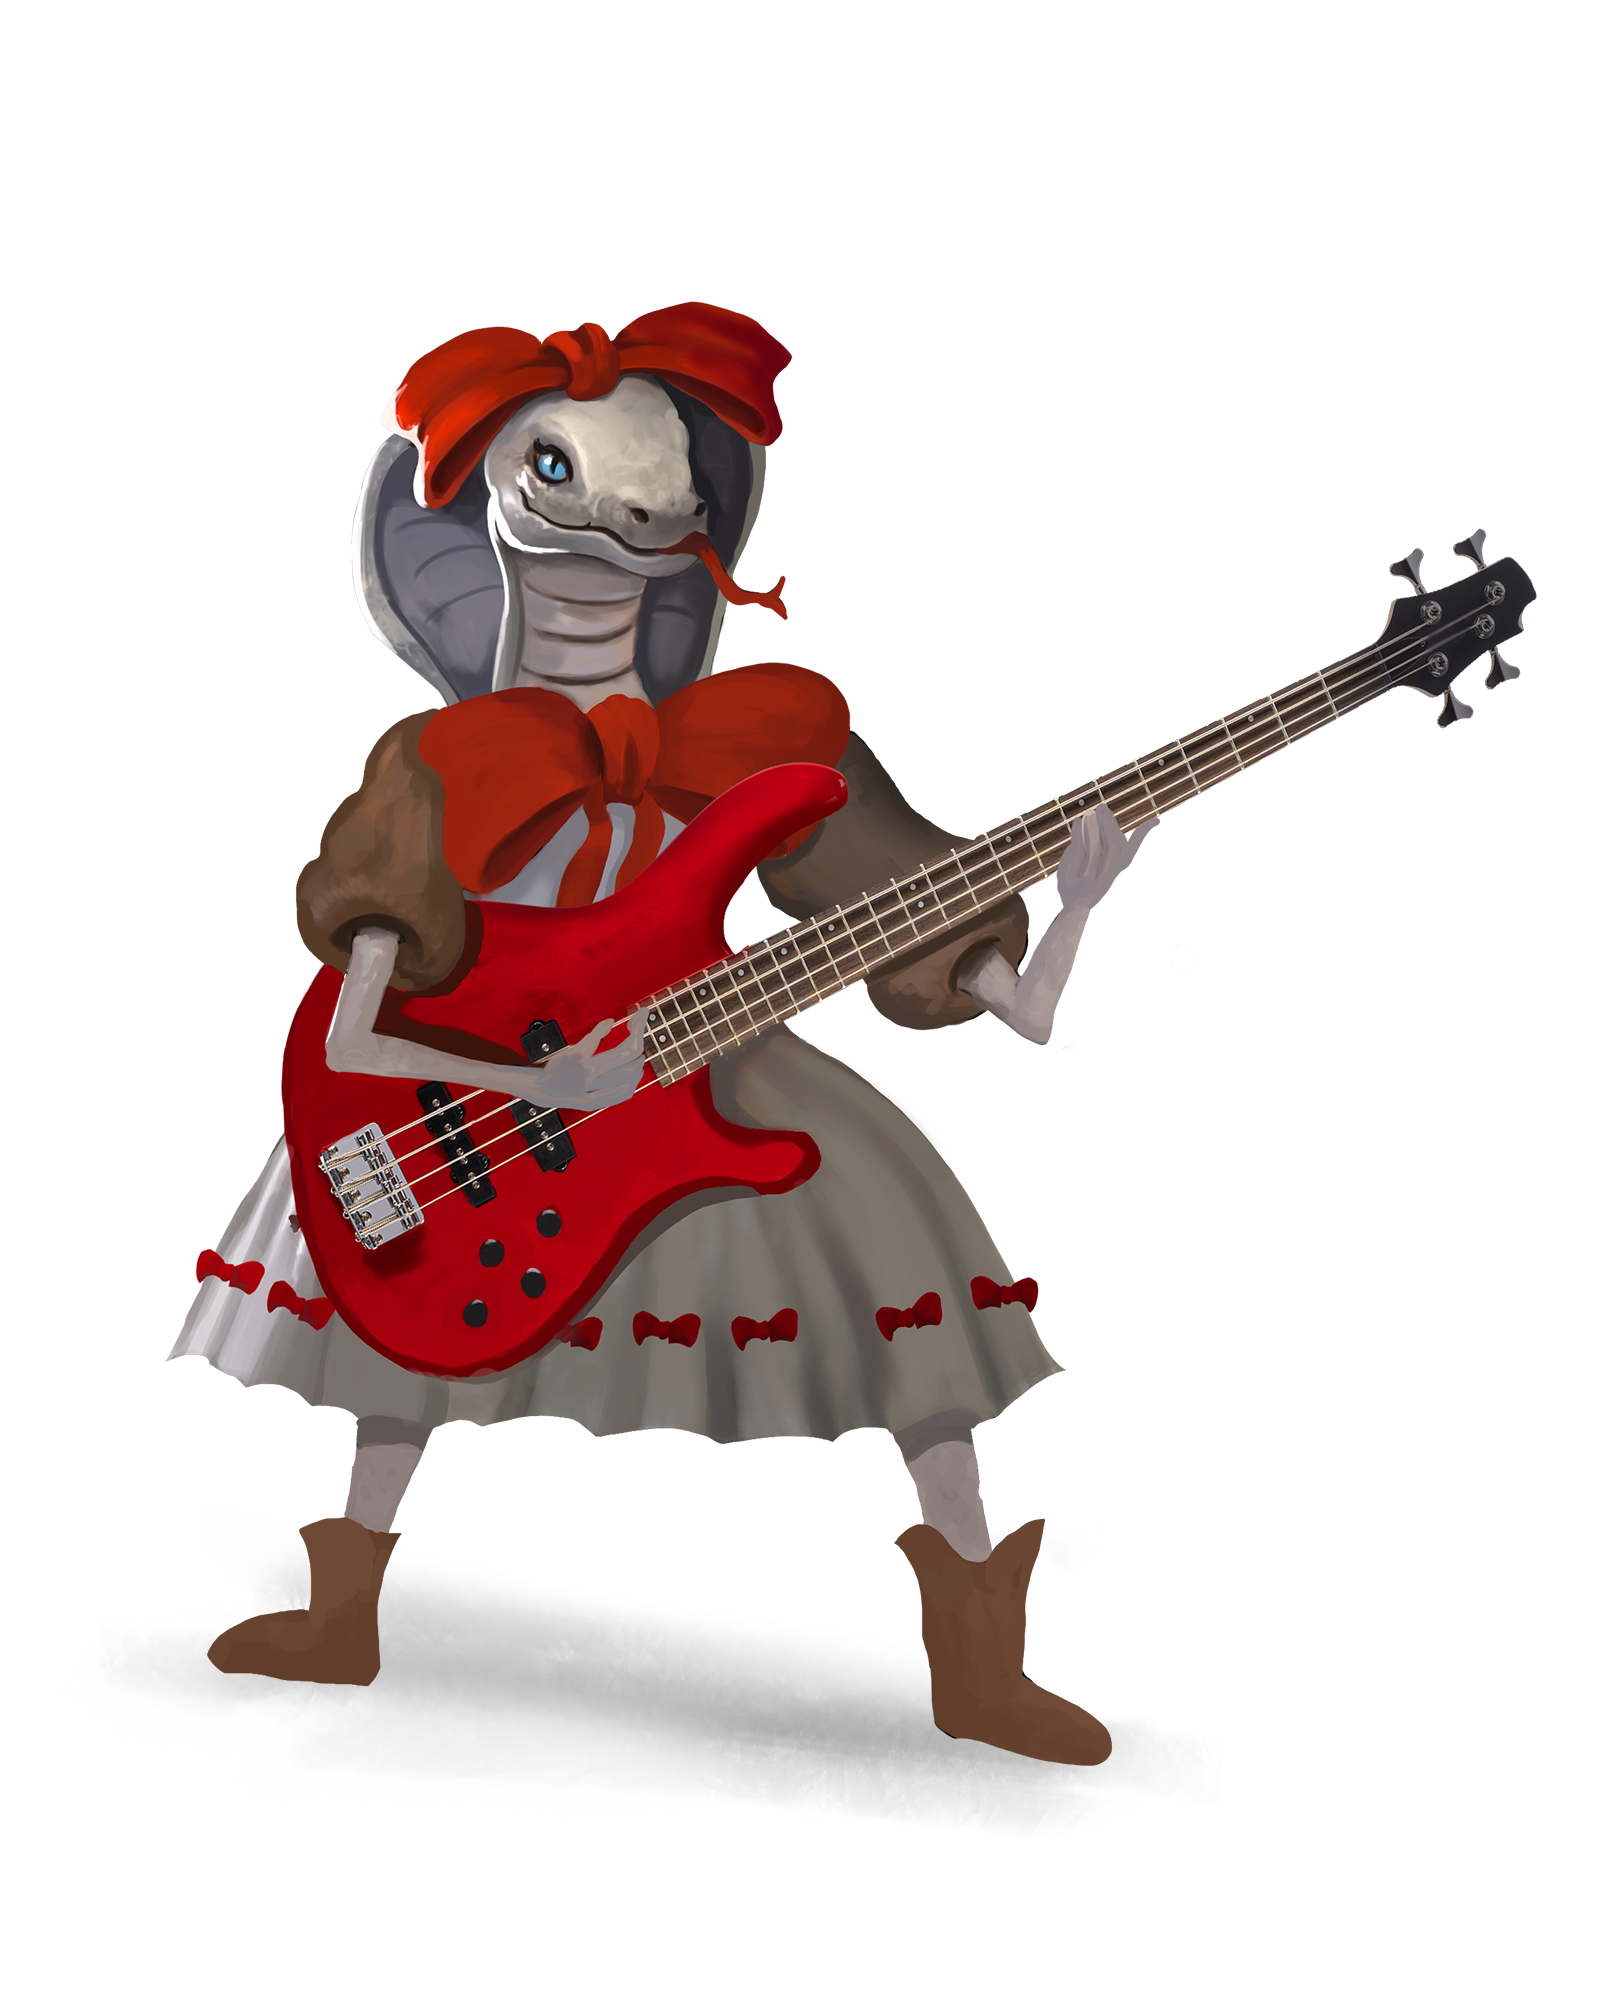 Tsuchi-ko, a snake-headed woman, plays her bass guitar with her tongue sticking out. She’s wearing a frilly dress and a big bow atop her head.